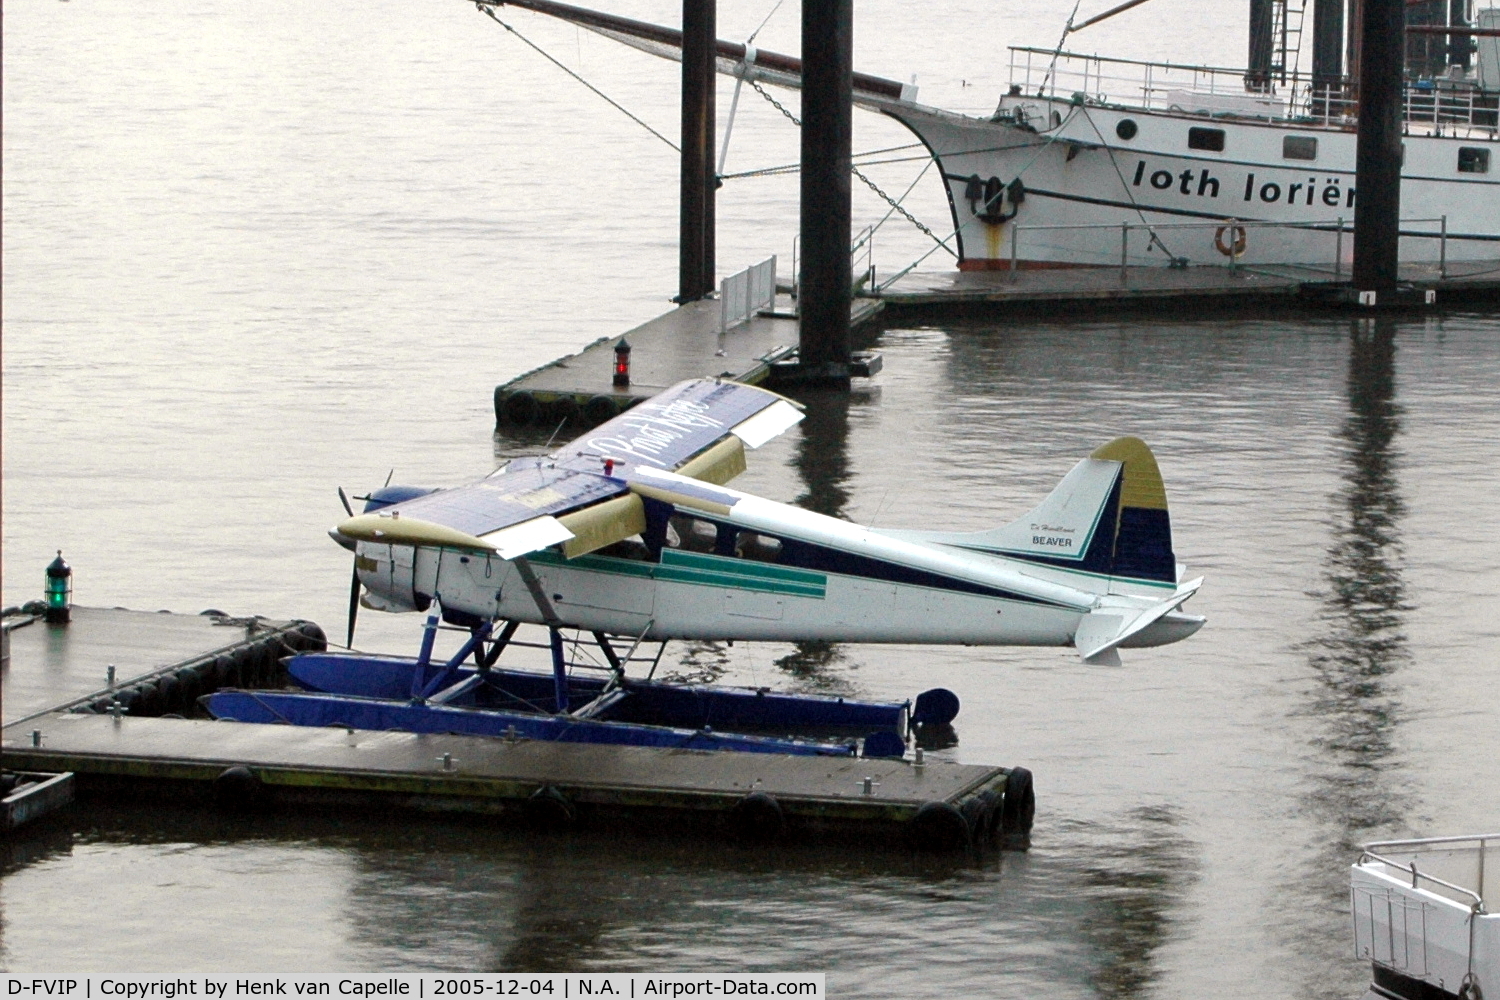 D-FVIP, 1962 De Havilland Canada DHC-2 Beaver C/N 1512, Beaver floatplane in the harbour of Hamburg (St. Pauli Landungsbrücke), painted in the colours of a coffee brand. It was used for sight-seeing flights. It crashed in an emergency landing on 2 july 2006.